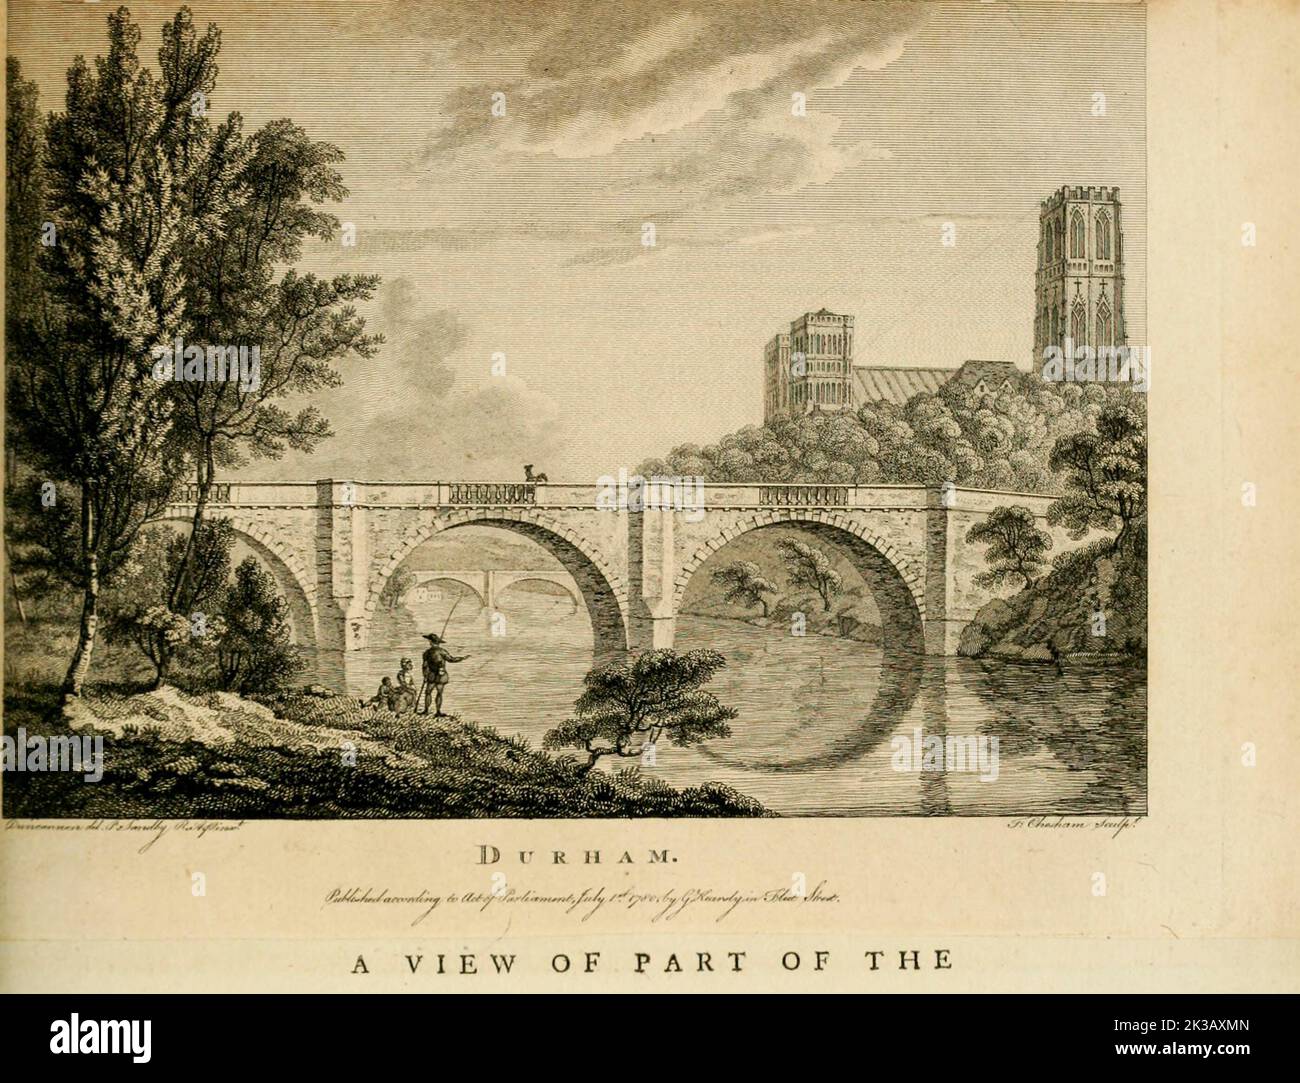 View of the City of Durham from the book ' Supplement to the antiquities of England and Wales ' by Francis Grose, Publication date 1777 Stock Photo